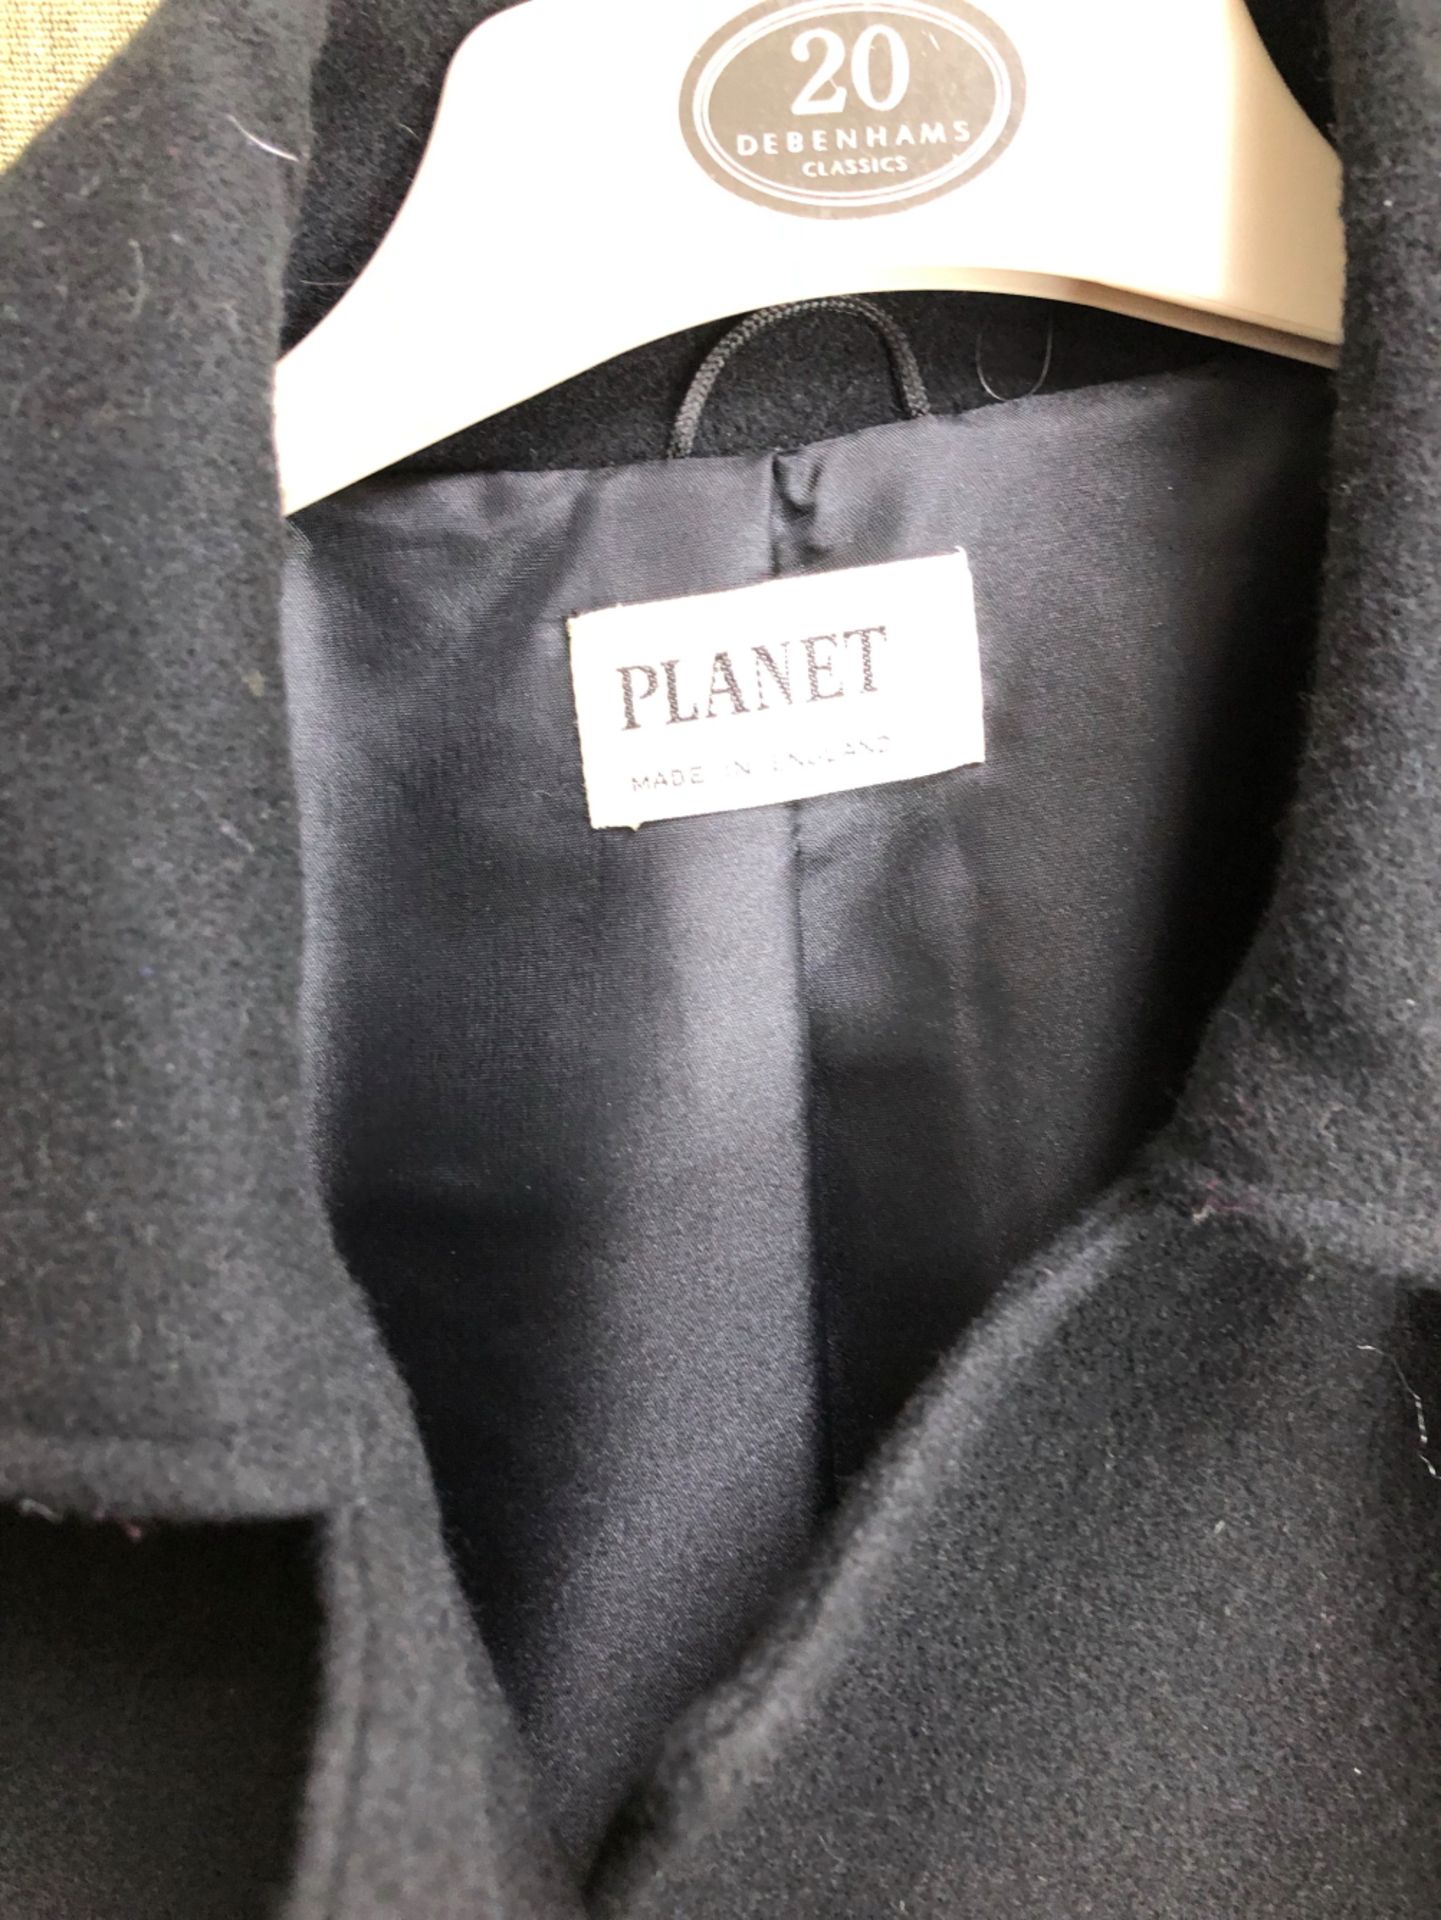 A LADYS WOOL JACKET: BLUE, SIZE 14,TOGETHER WITH A LADYS WOOL JACKET: PLANET, BLACK, ARMPIT TO - Image 7 of 7